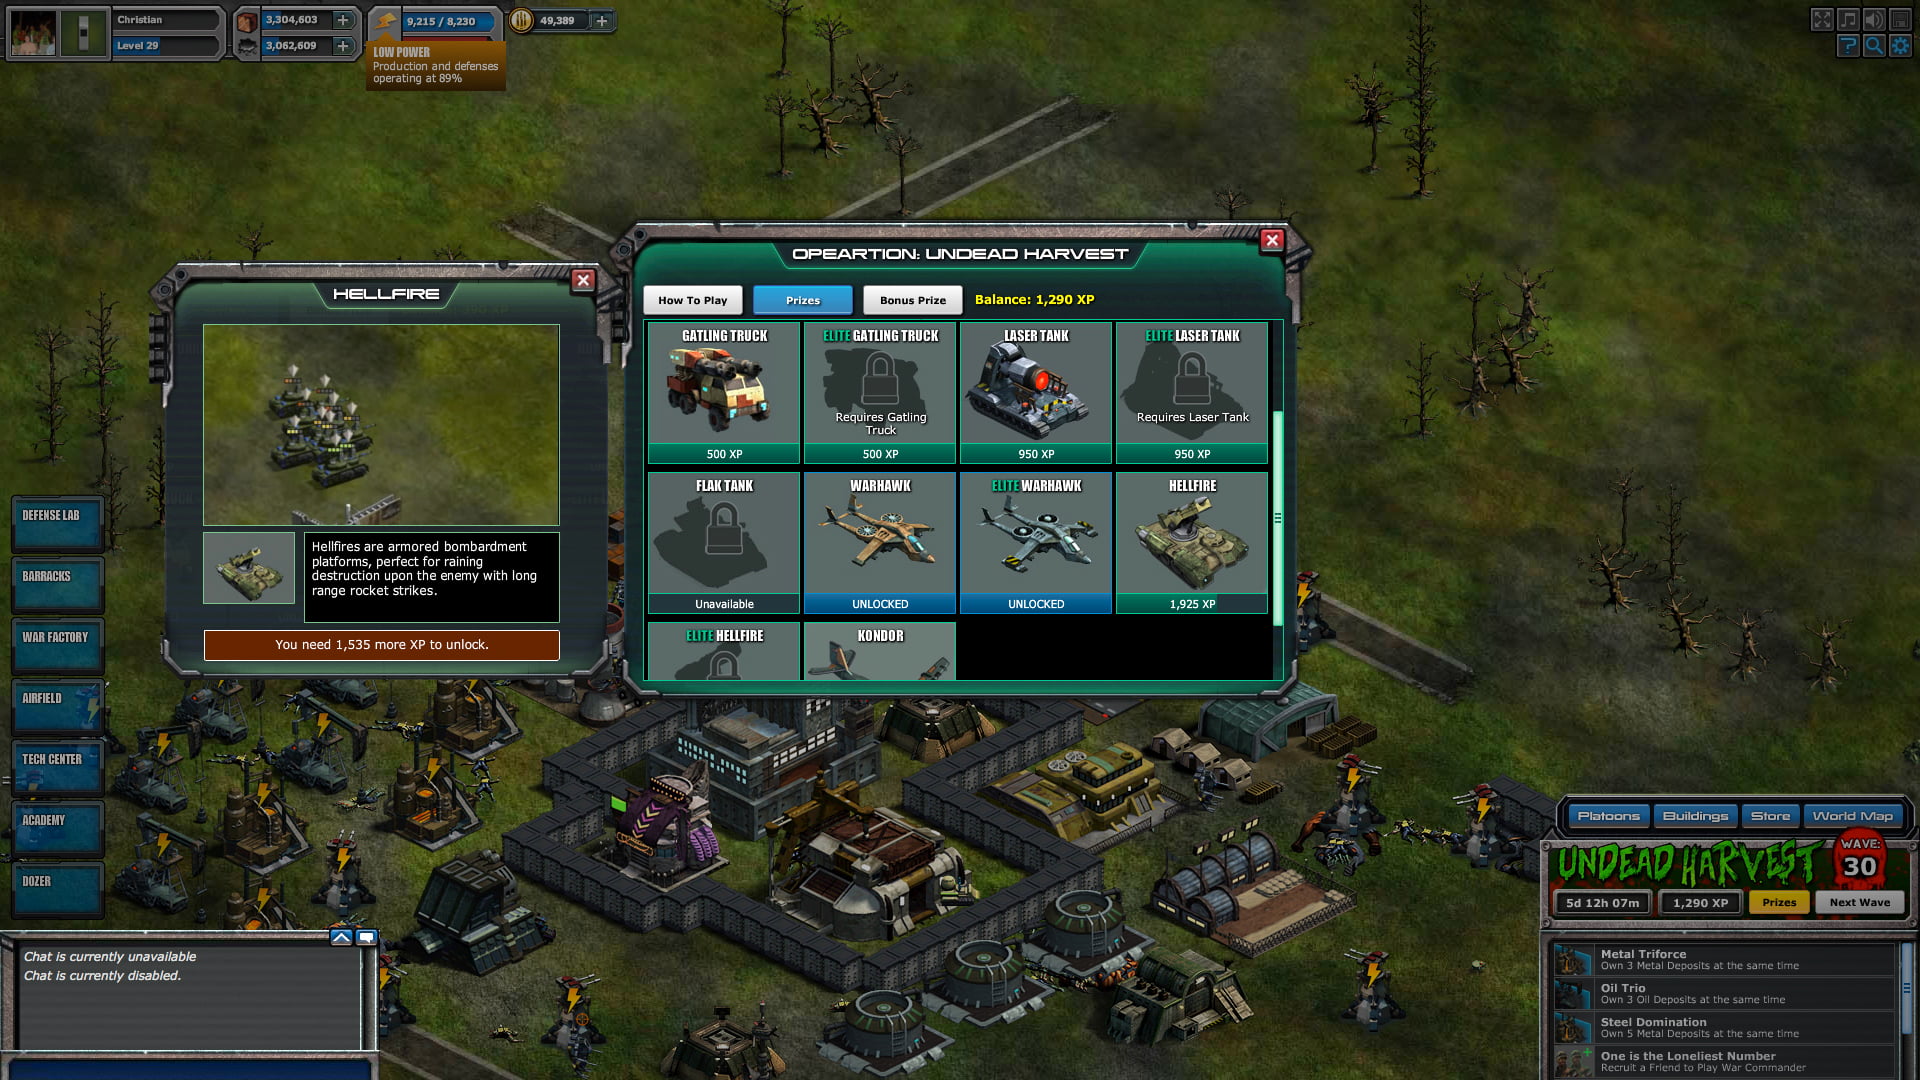 commander war games kixeye army battle onrpg strategy build righteous operation ones mmogames attack